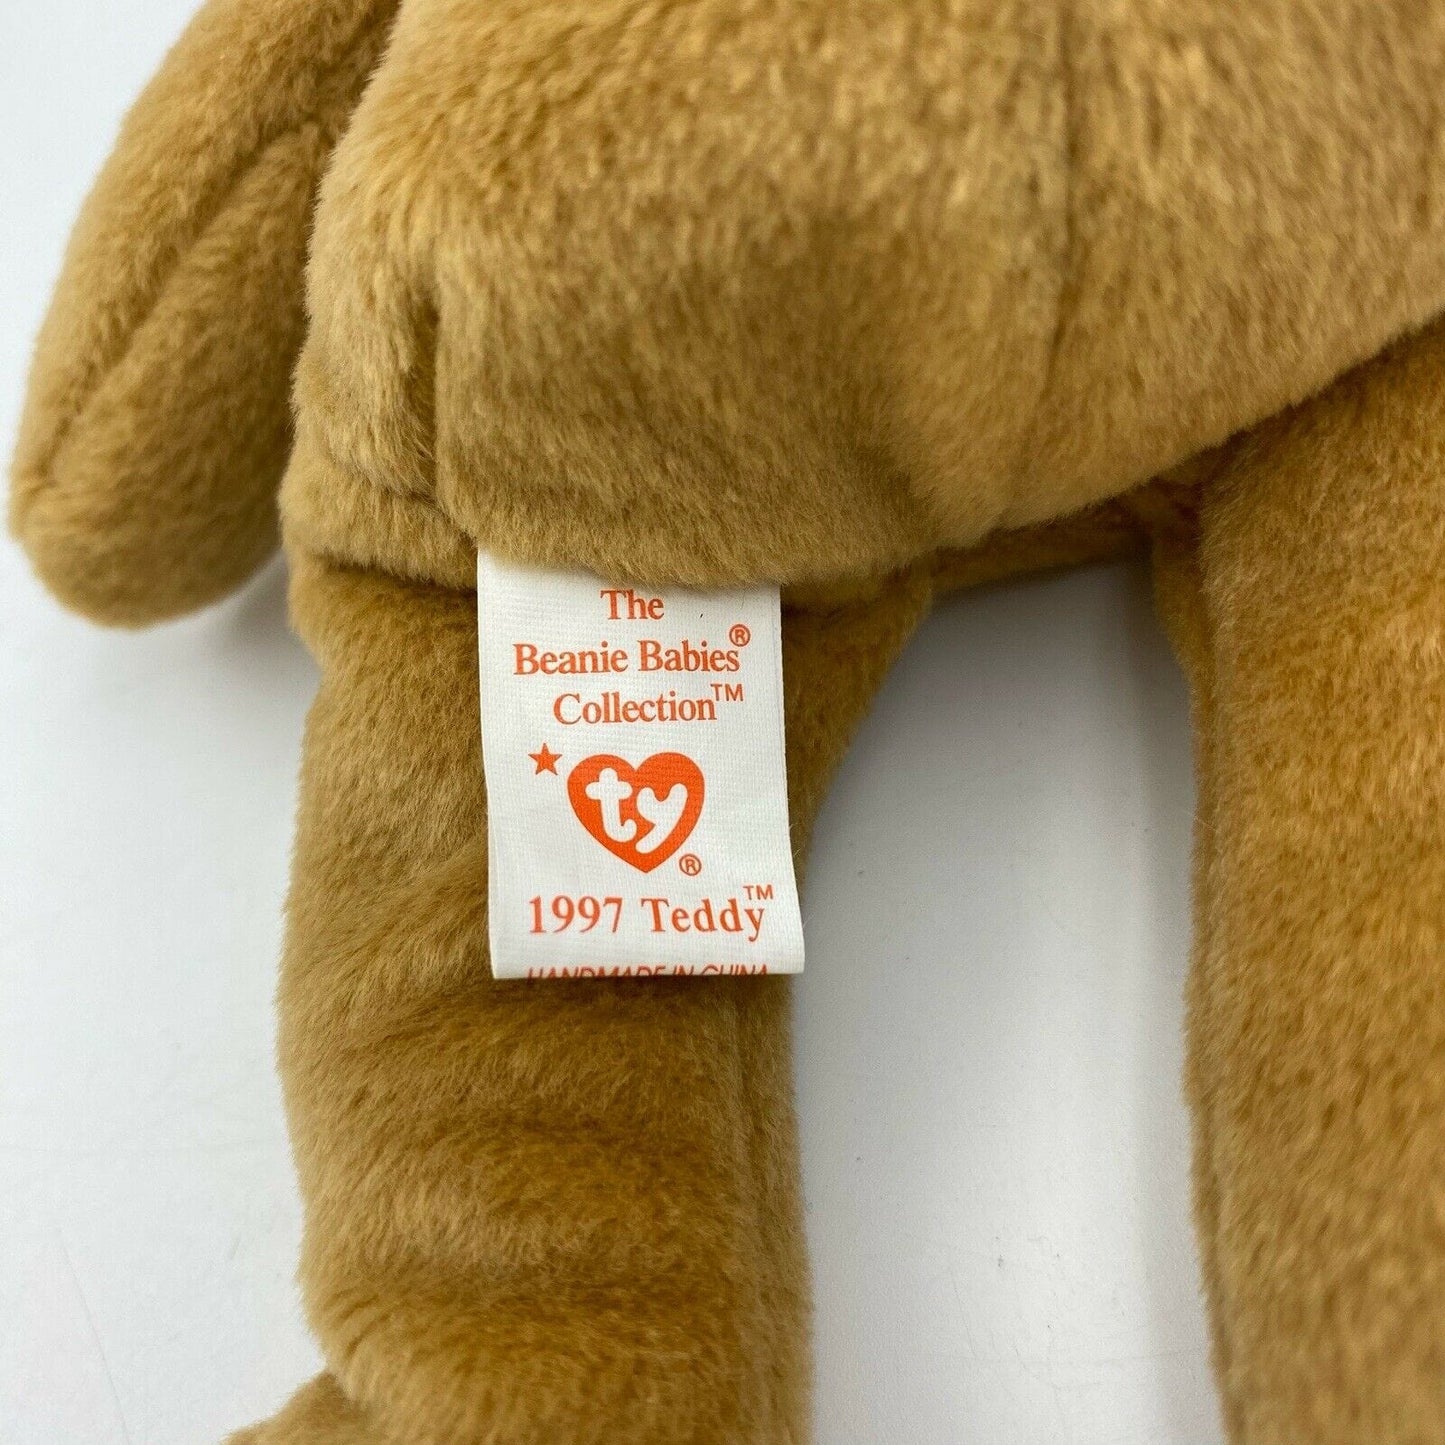 Ty Original Beanie Babies 1997 Teddy Style 4200 MINT Condition - Tag Errors